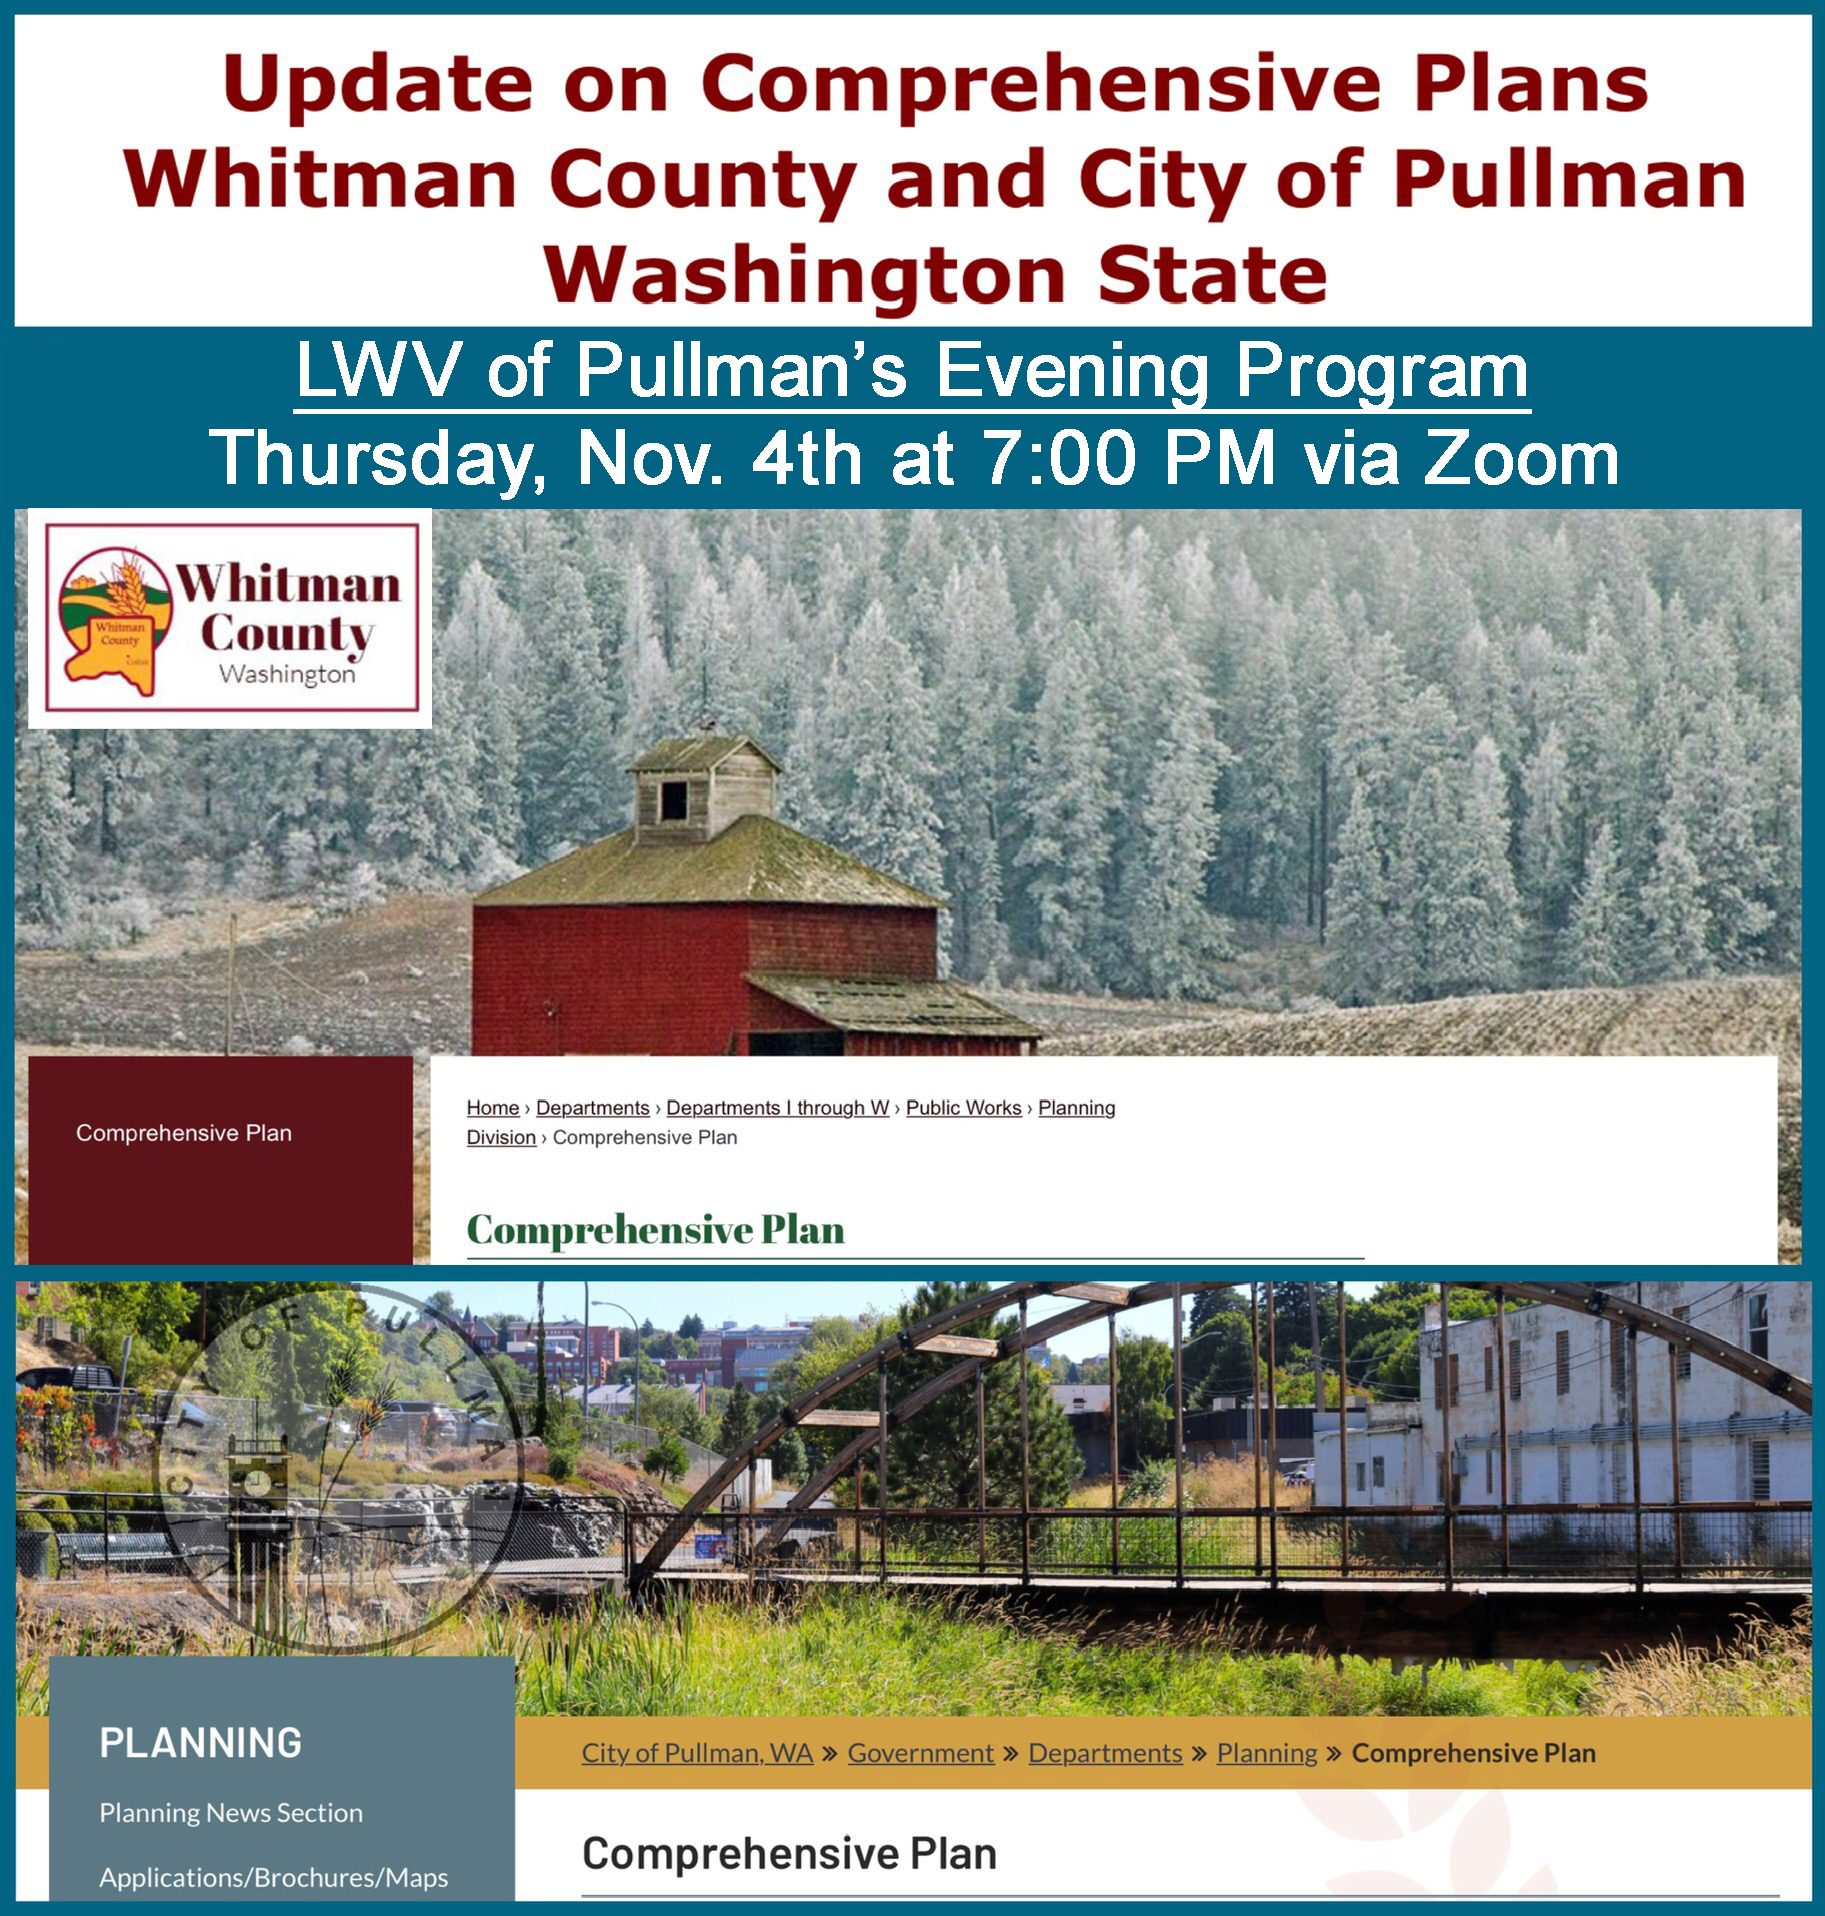 Collage of images from the City of Pullman website with a bridge and the Whitman County website with a red barn and frosted trees and the title of this meeting.